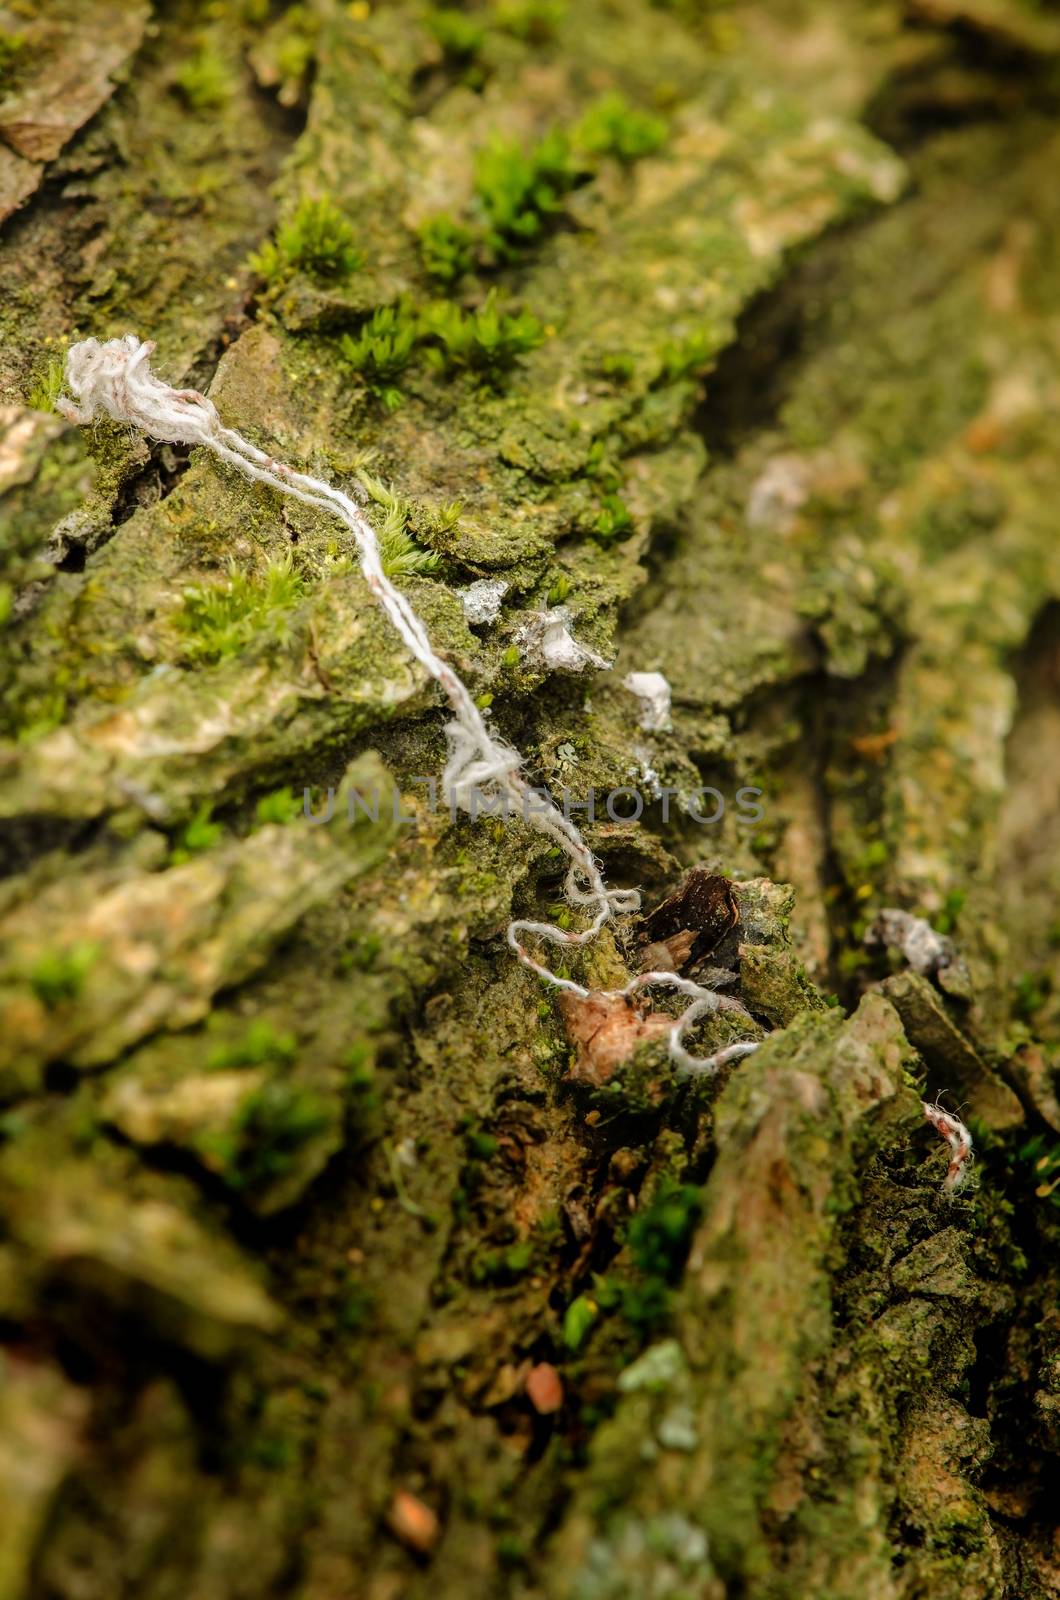 Old white string on the mossy rock texture pattern.